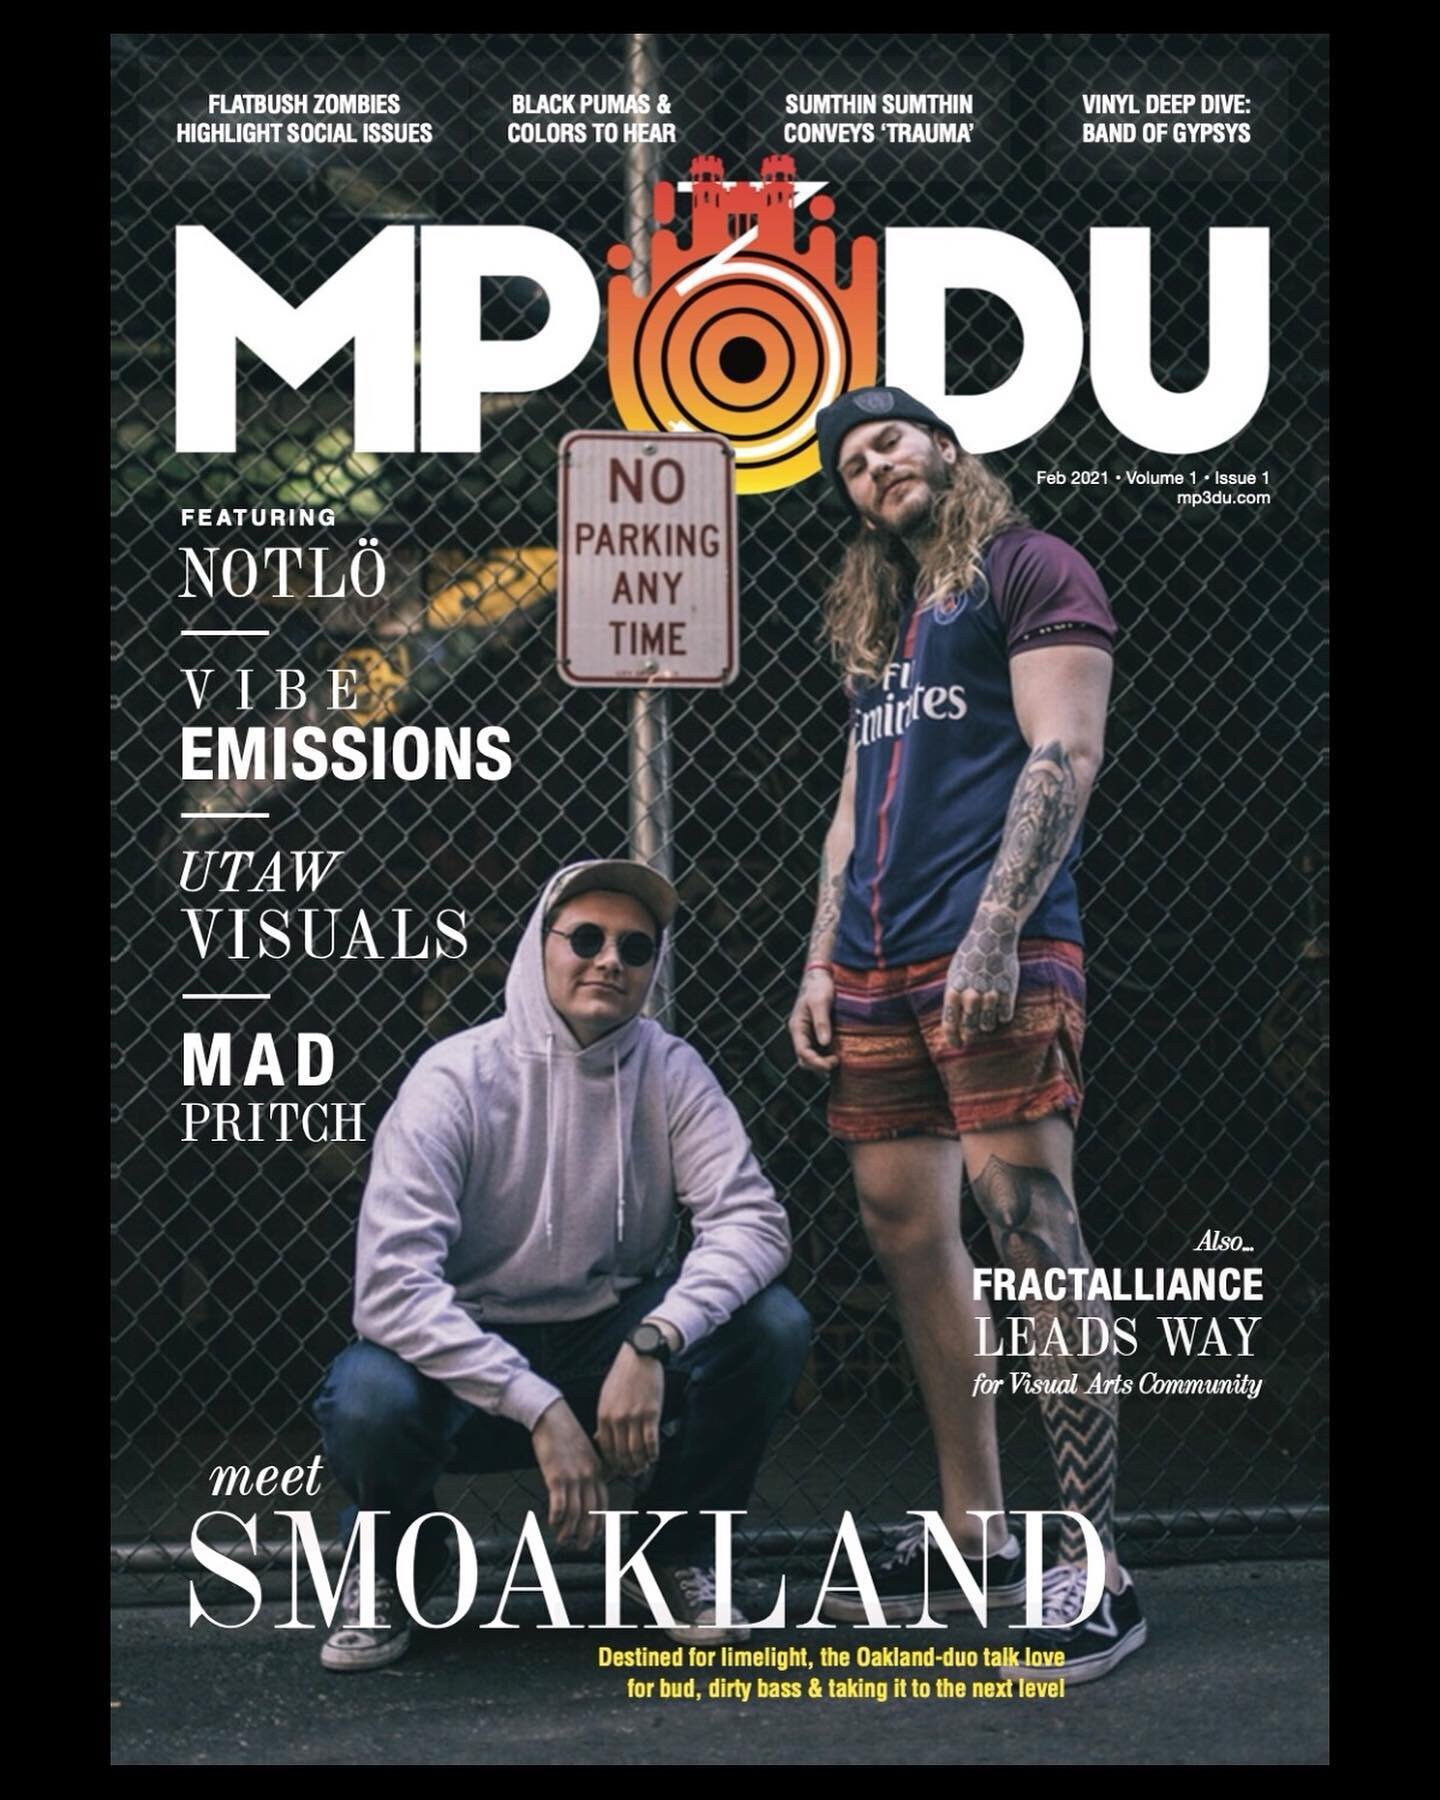 Today&rsquo;s the day! MP3DU just published it&rsquo;s first-ever digital magazine issue 😍

ECSTATIC to have worked w/ @smoaklandbeats, @notlo.music, @vibeemissions, @mad_pritch, and all the students involved to make this milestone a reality. You ca